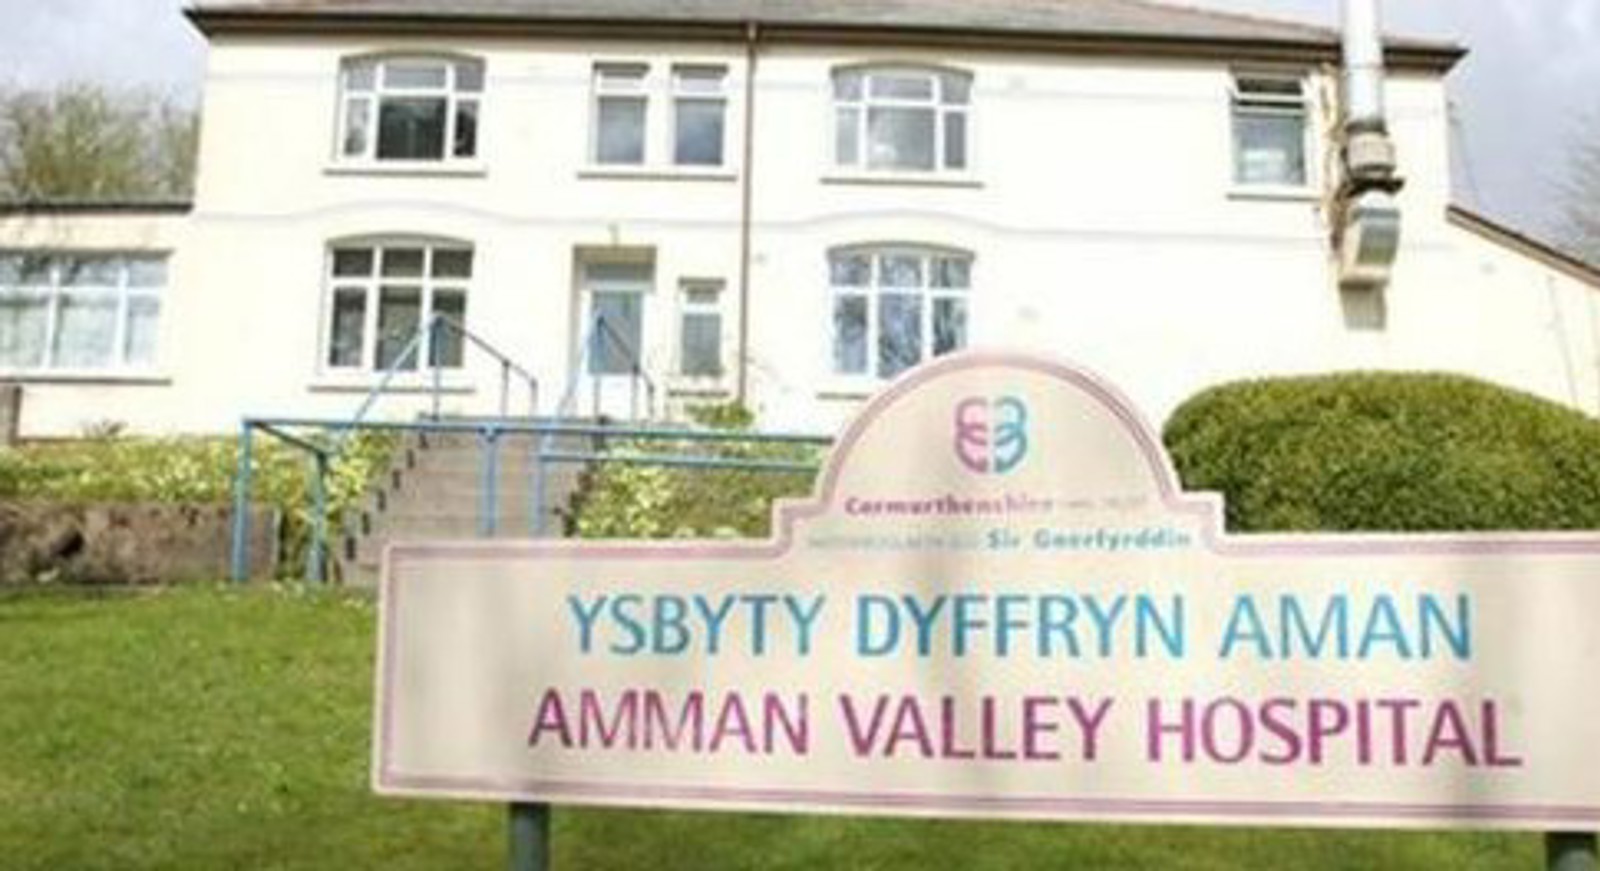 Amman Valley Hospital building and sign outside.